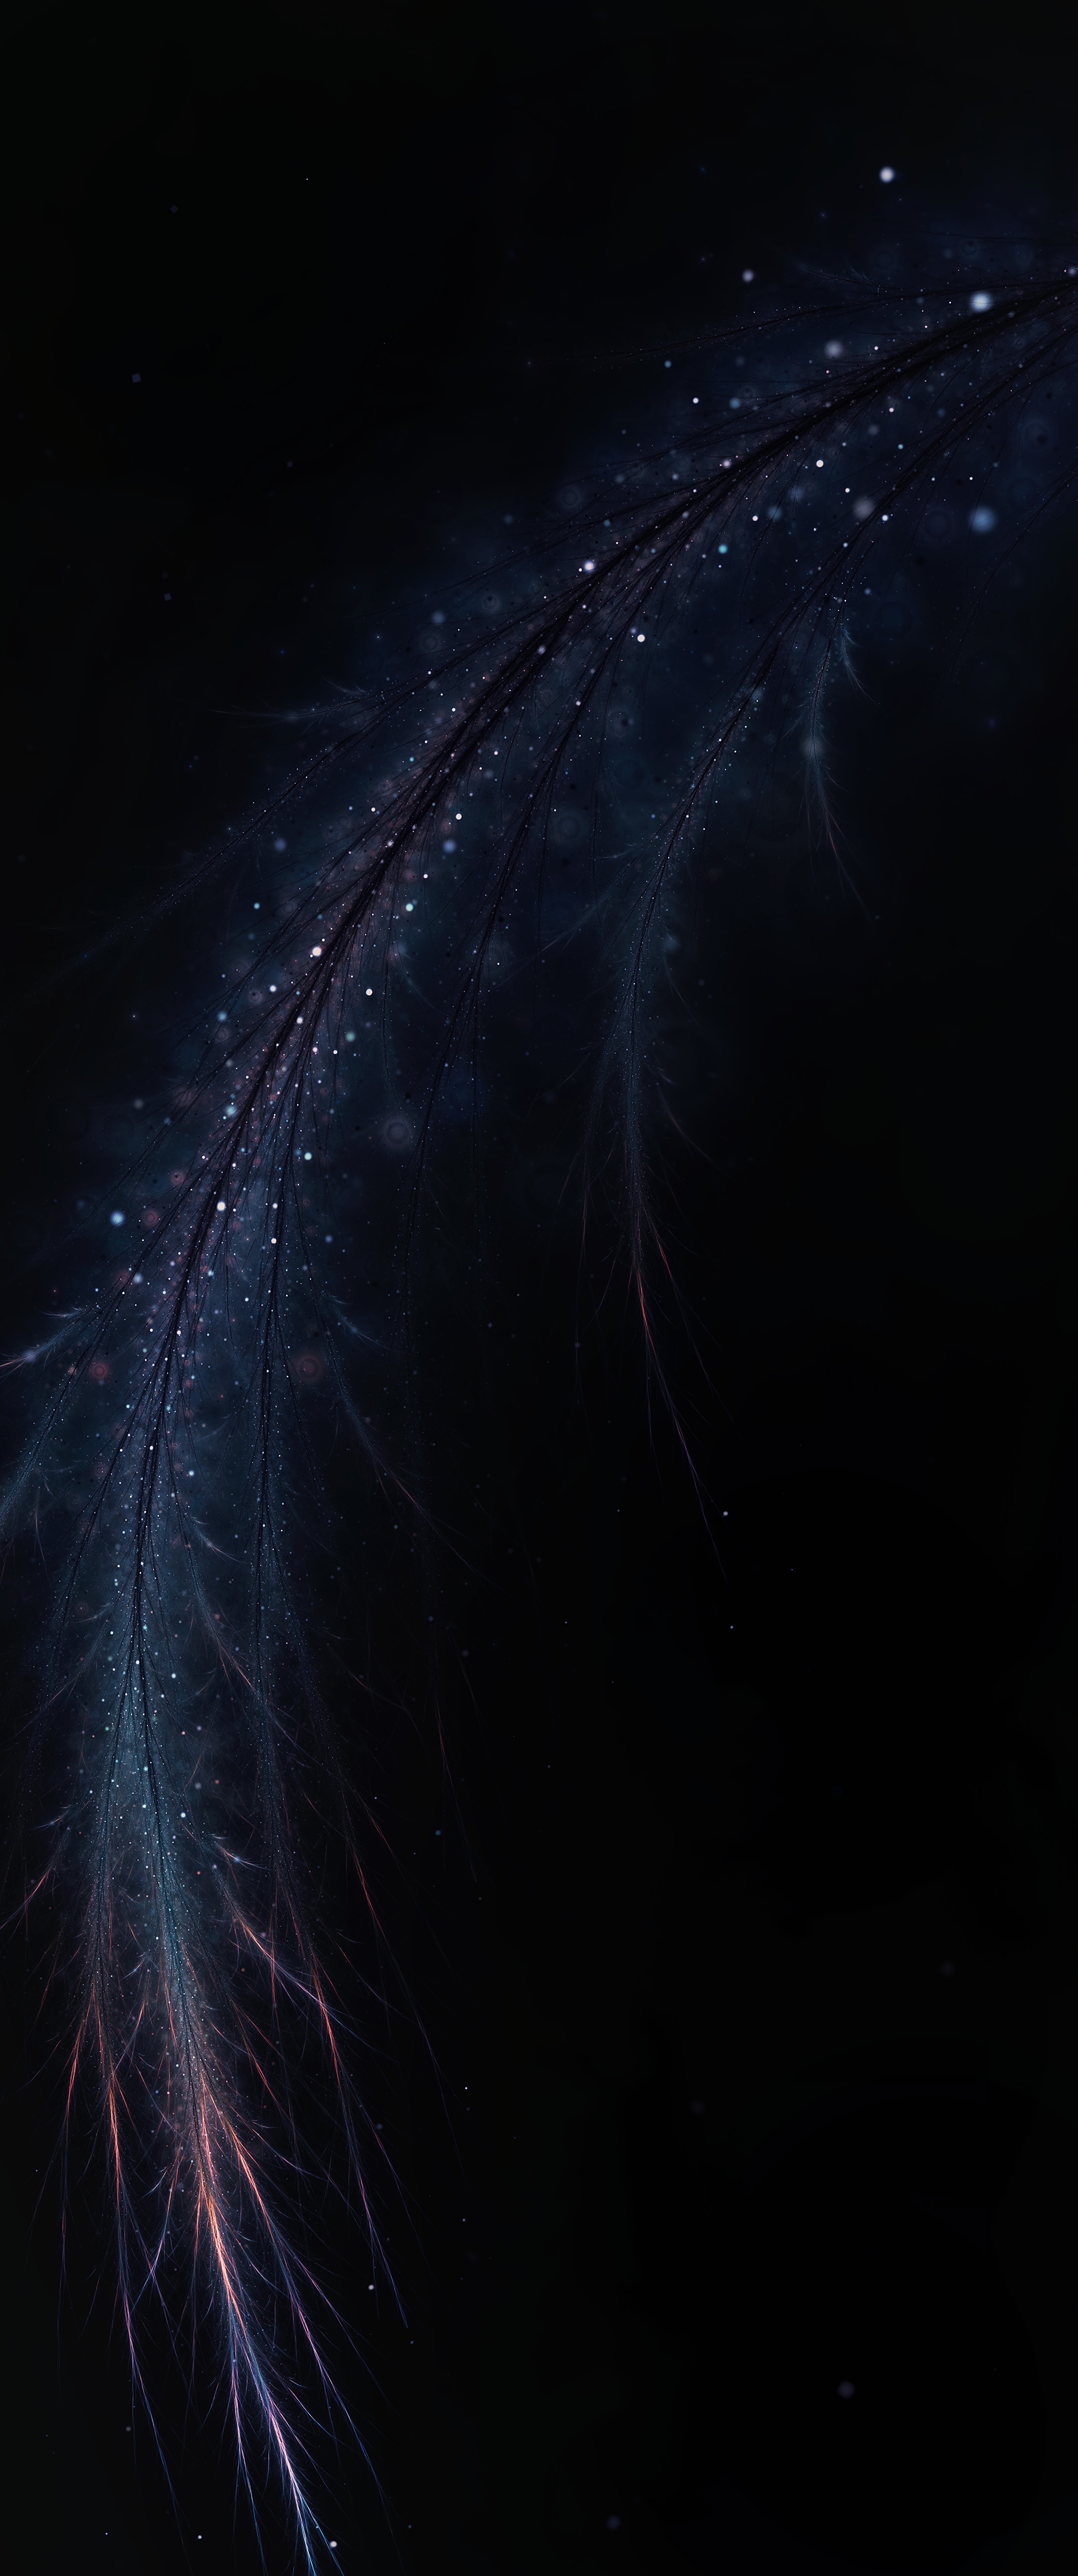 dark, abstract, feather, fractal, shine, brilliance, branch, pen wallpaper for mobile